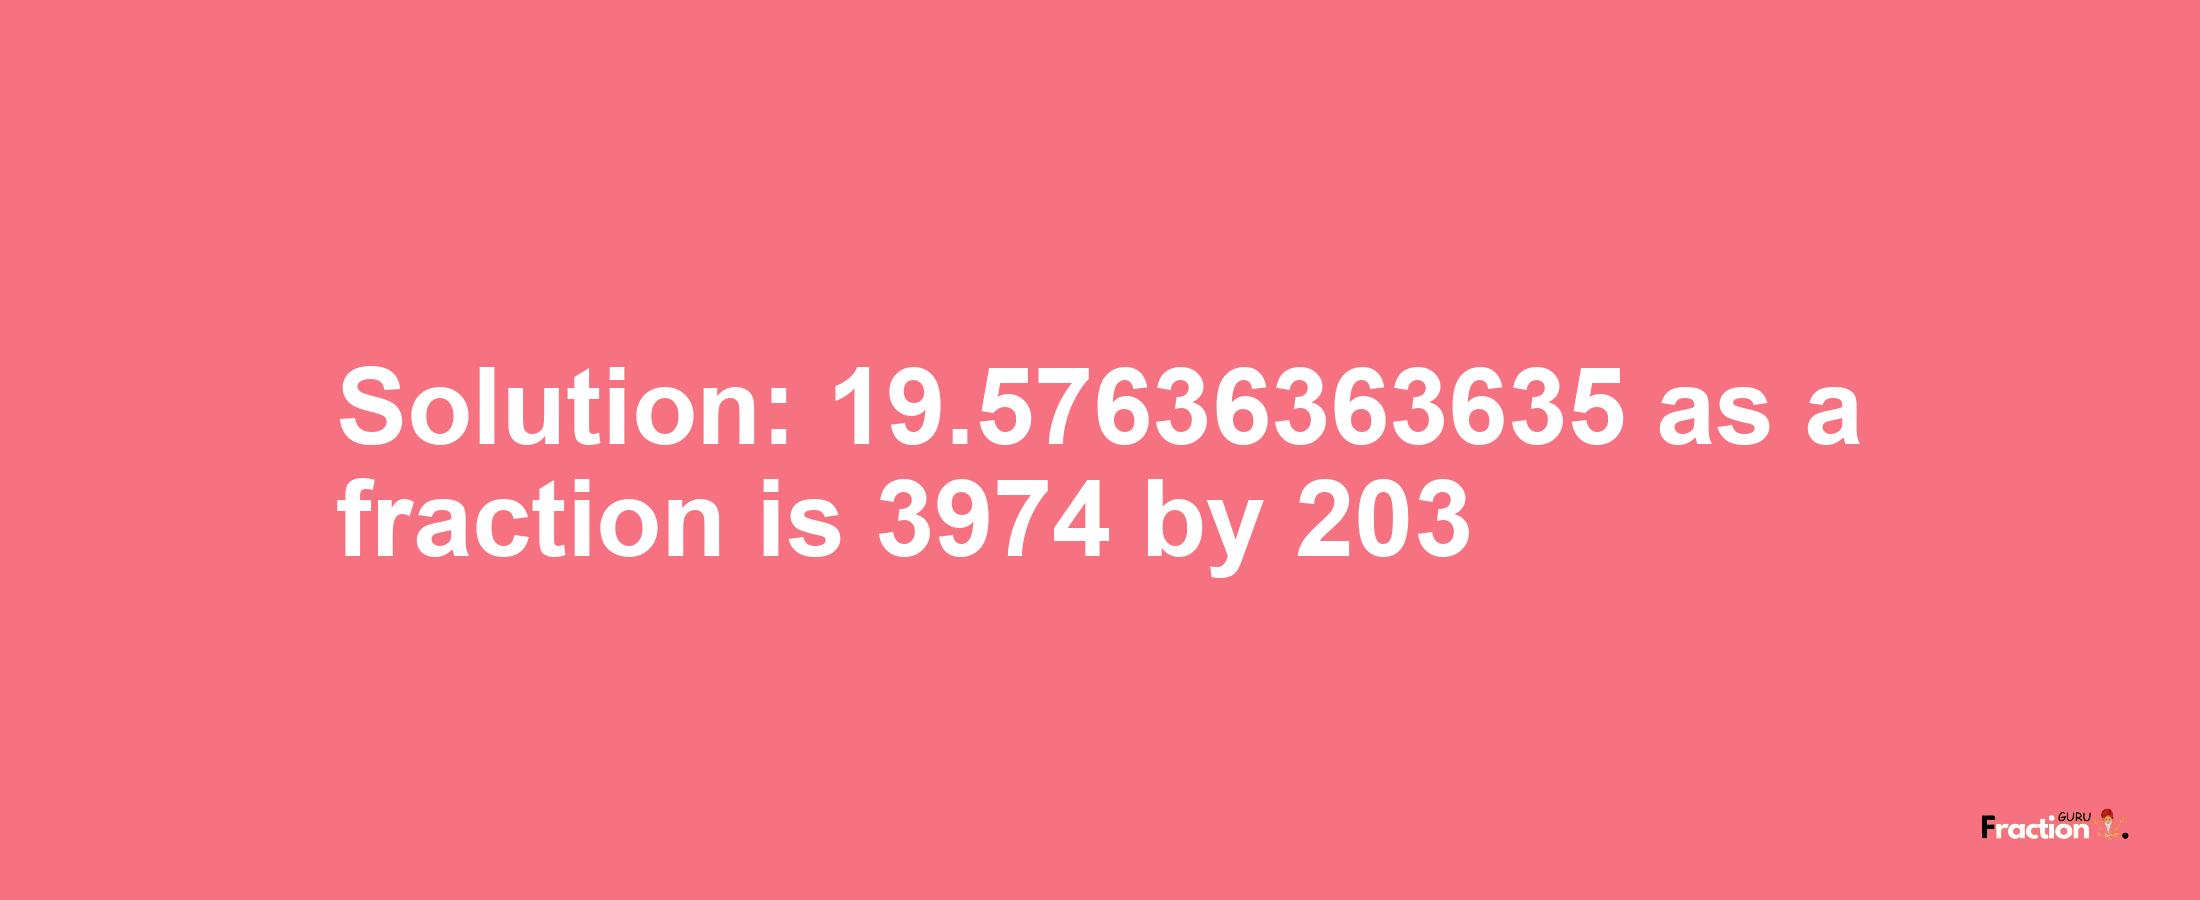 Solution:19.57636363635 as a fraction is 3974/203